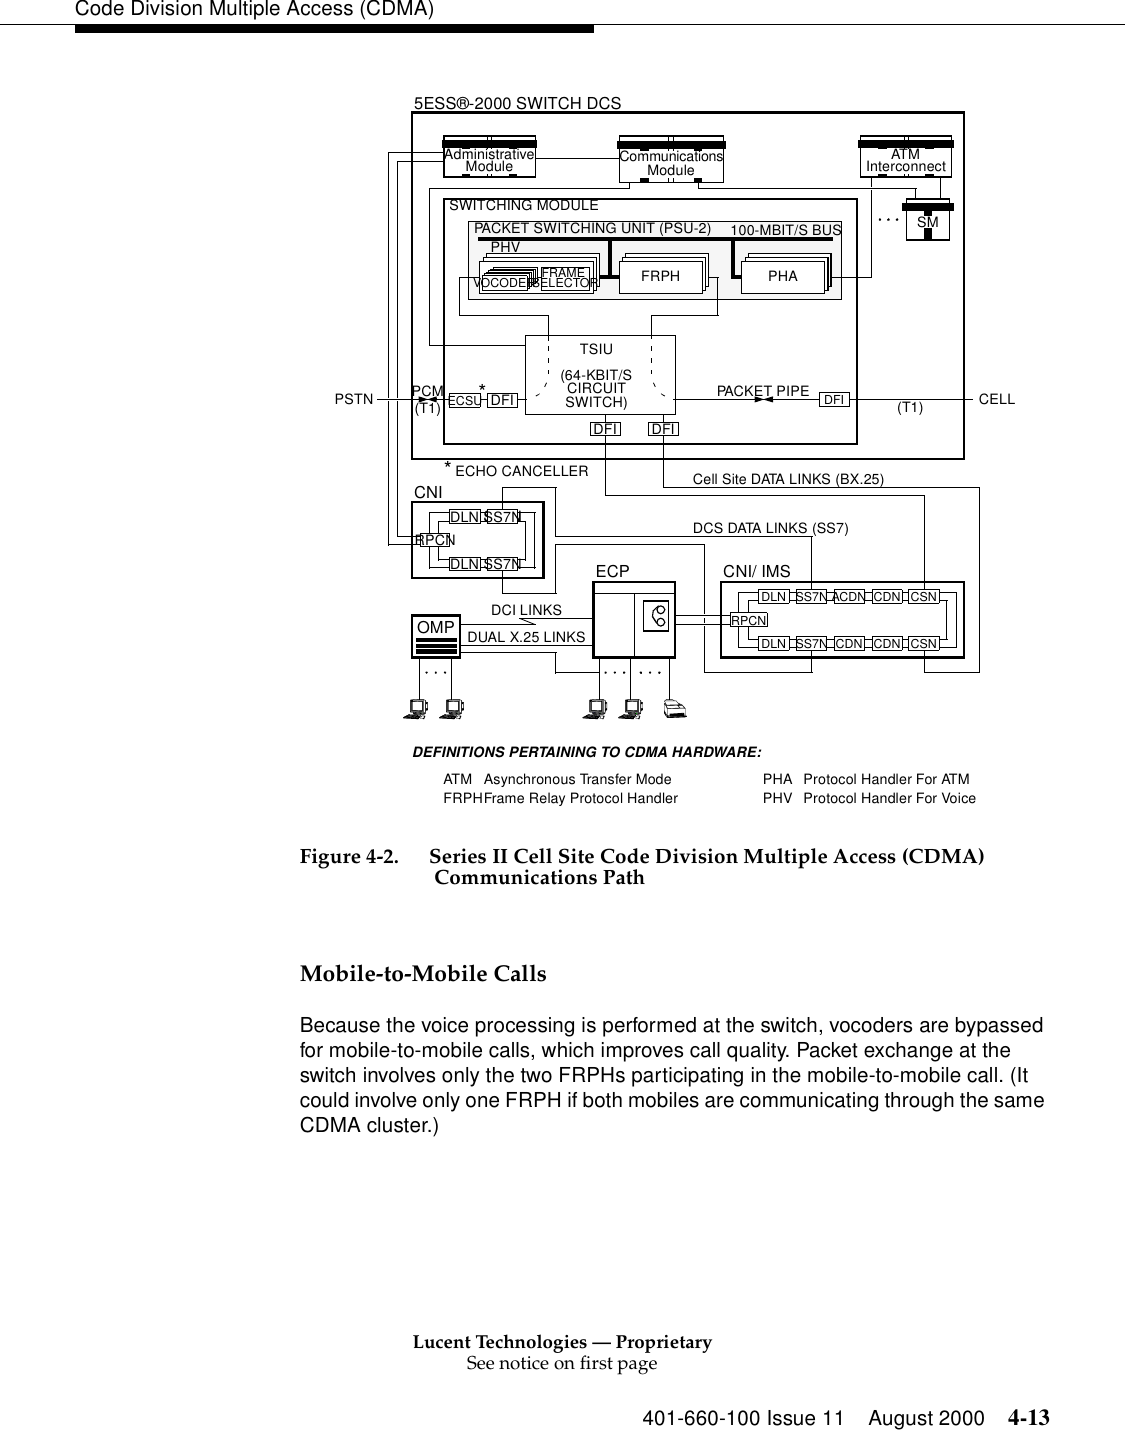 Lucent Technologies — ProprietarySee notice on first page401-660-100 Issue 11 August 2000 4-13Code Division Multiple Access (CDMA)Figure 4-2. Series II Cell Site Code Division Multiple Access (CDMA) Communications PathMobile-to-Mobile CallsBecause the voice processing is performed at the switch, vocoders are bypassed for mobile-to-mobile calls, which improves call quality. Packet exchange at the switch involves only the two FRPHs participating in the mobile-to-mobile call. (It could involve only one FRPH if both mobiles are communicating through the same CDMA cluster.)DCS DATA LINKS (SS7)Cell Site DATA LINKS (BX.25)PACKET PIPEPHAPHVSWITCHING MODULEPACKET SWITCHING UNIT (PSU-2)5ESS®-2000 SWITCH DCSFRPHFRAME SELECTORVOCODER100-MBIT/S BUSPSTN CELLPCM DFICommunicationsModule ATMInterconnectSMCDNCDNCSNSS7NCSNSS7NDUAL X.25 LINKSOMP RPCNECPFRPHATMDEFINITIONS PERTAINING TO CDMA HARDWARE:Frame Relay Protocol HandlerAsynchronous Transfer Mode PHAPHVProtocol Handler For ATMProtocol Handler For Voice(T1) (T1)DLNDLNCNI/ IMSSS7NSS7NDLNDLNCNIDFI DFITSIU(64-KBIT/SCIRCUITSWITCH)SS7NRPCNAdministrativeModuleECSU DFI* ECHO CANCELLER*CDNACDNDCI LINKS